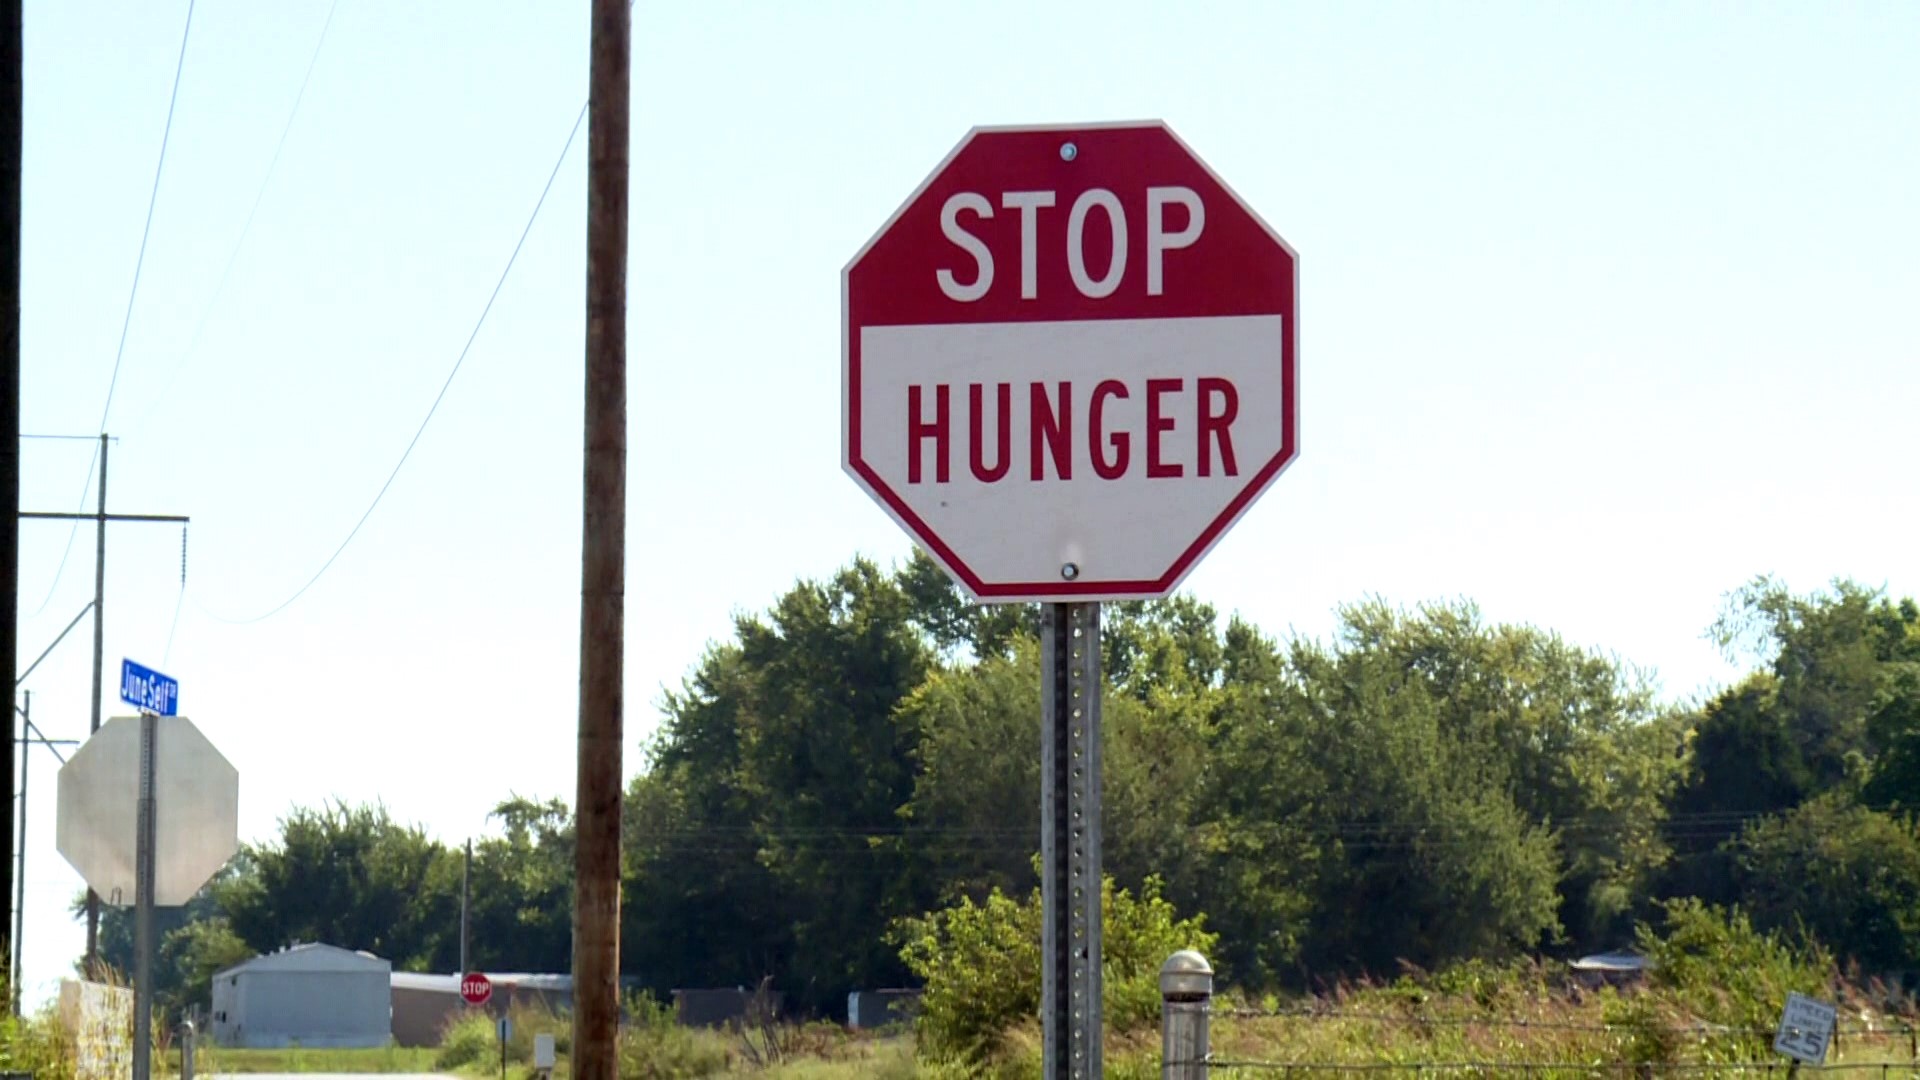 Across Arkansas, 444,130 people are fighting food insecurity. Feeding America says that includes more than 138,410 children.